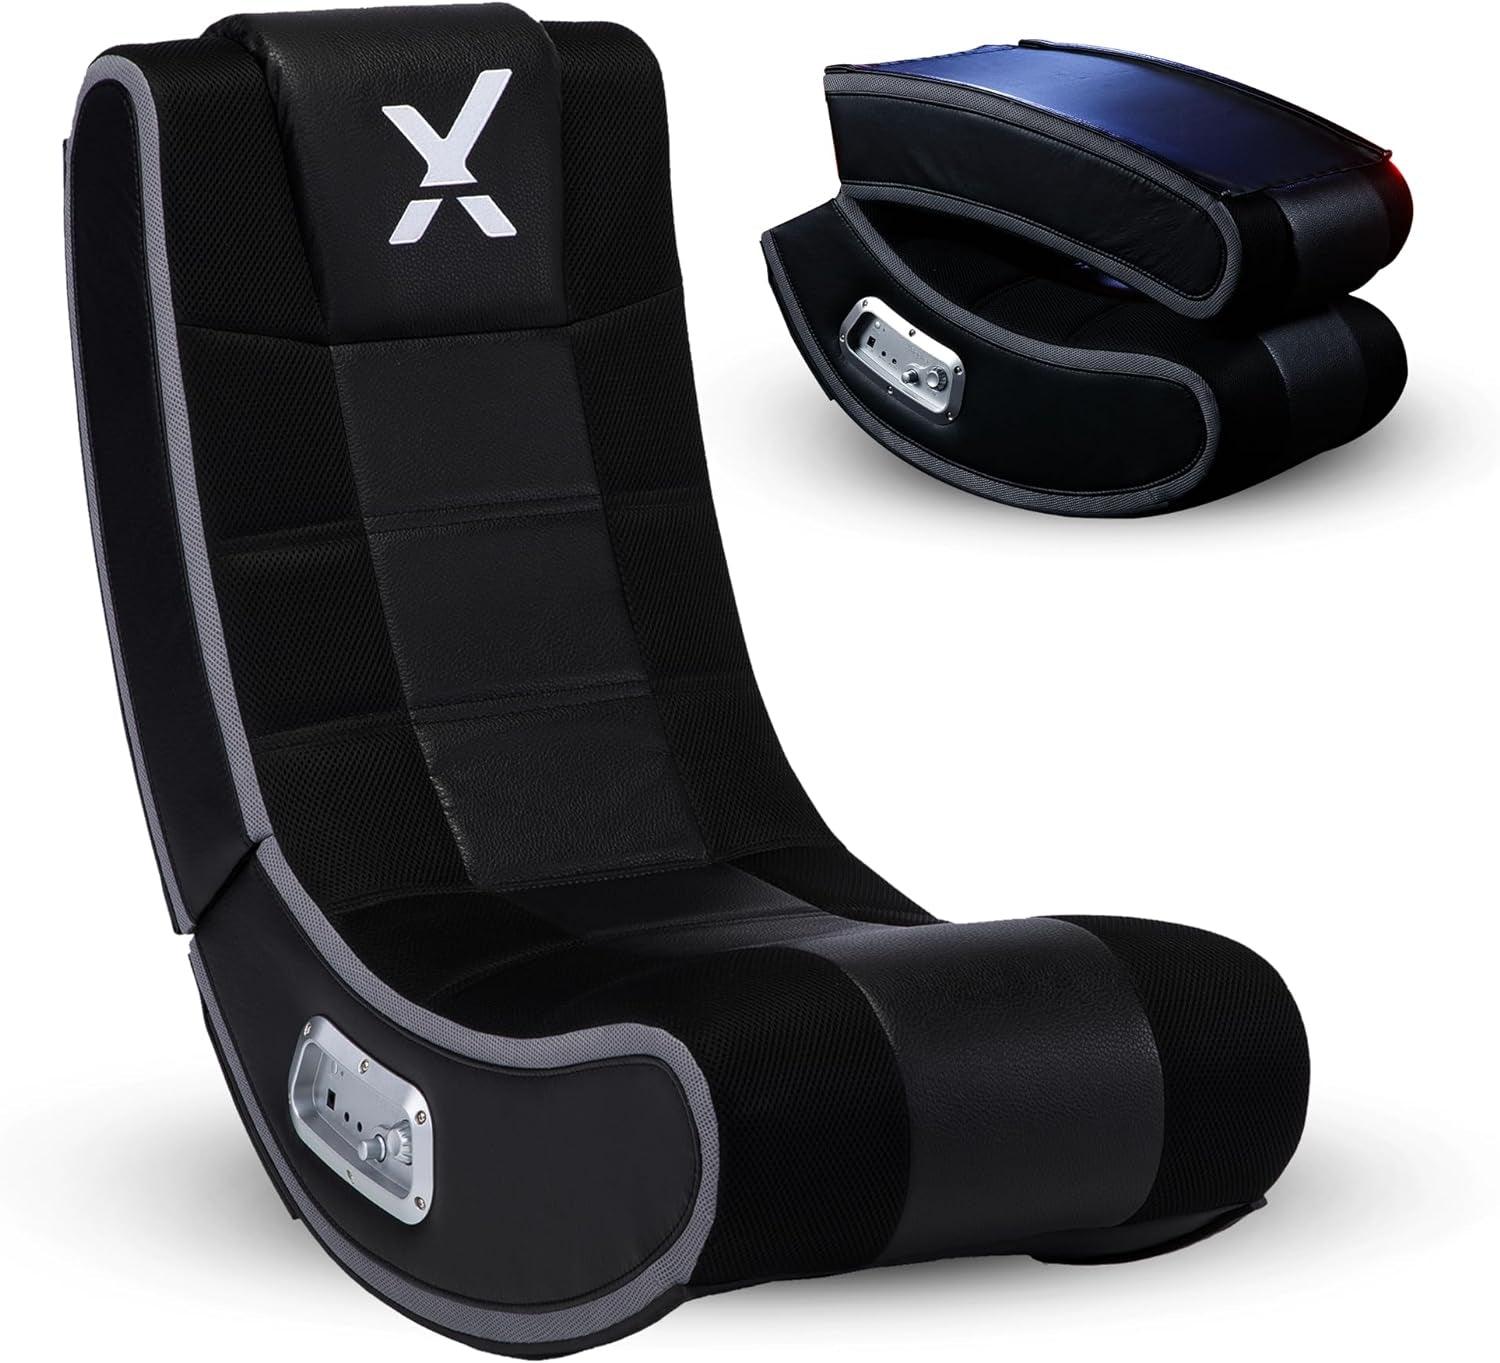 X Rocker Floor Rocking Gaming Chair, Headrest Mounted Bluetooth Speakers for Audio, Compatible with All Major Gaming Consoles